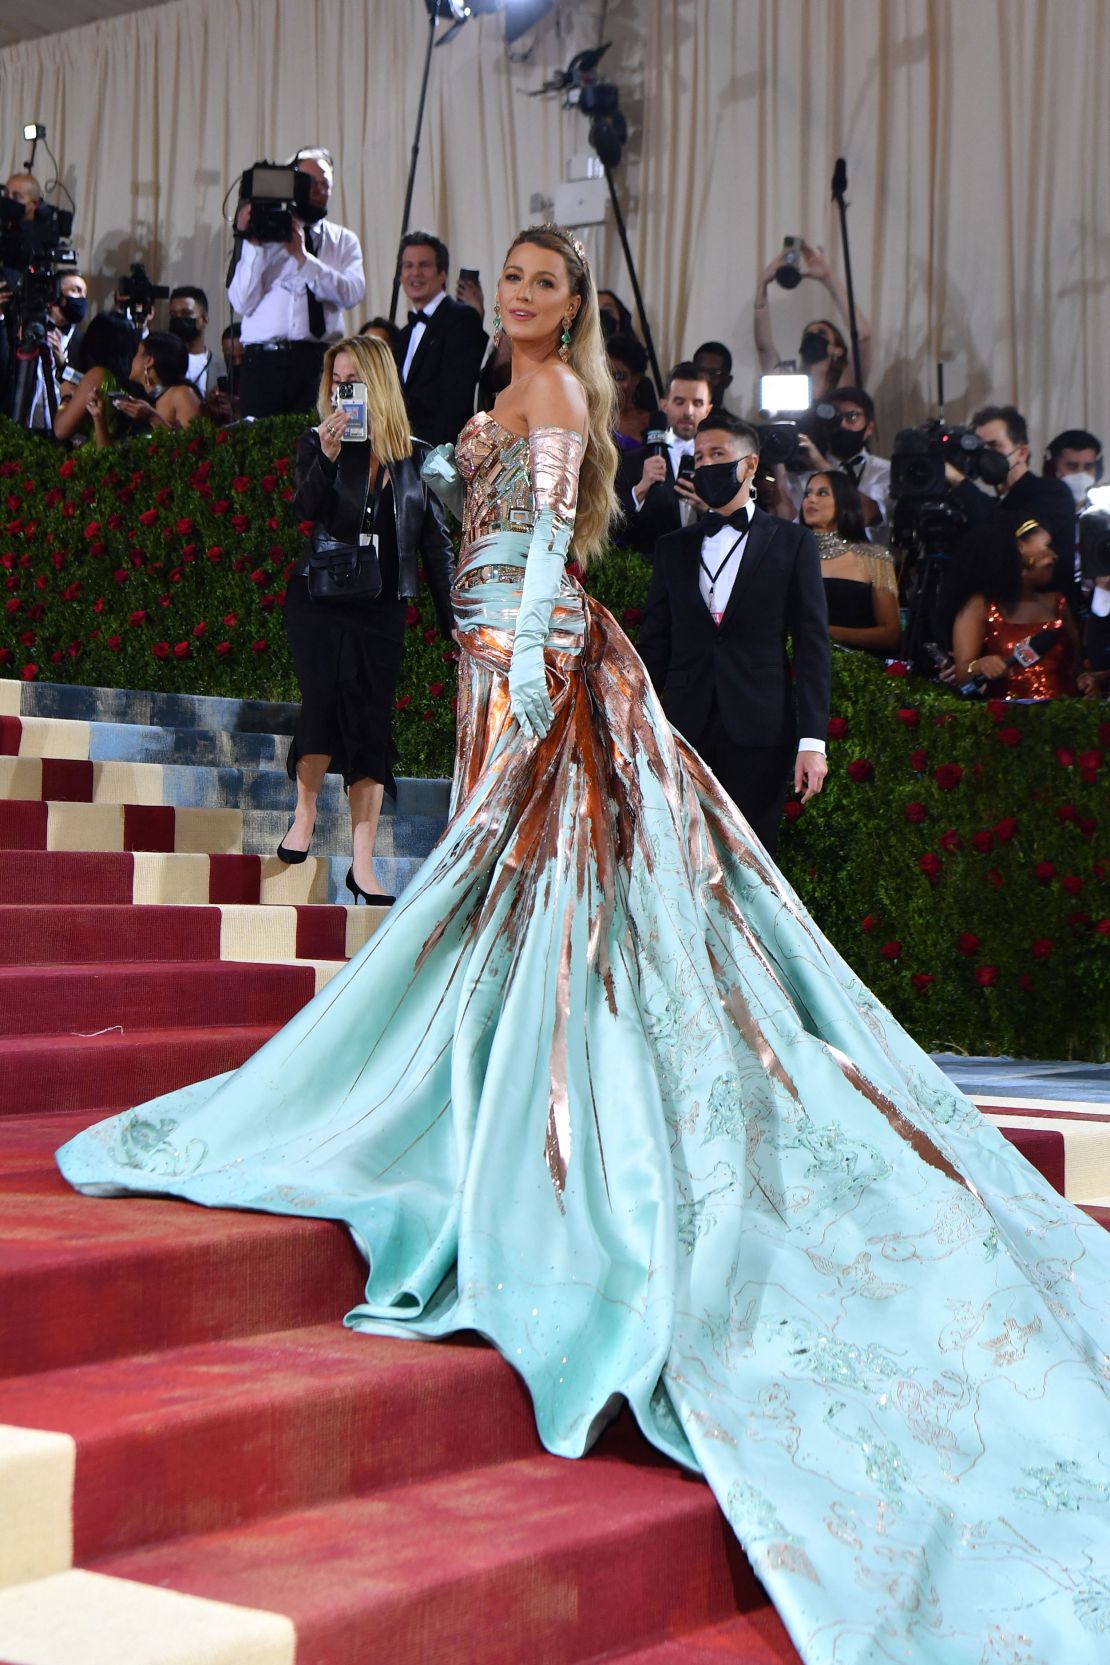 Blake Lively transforms at the Met Gala in architecture-inspired ...